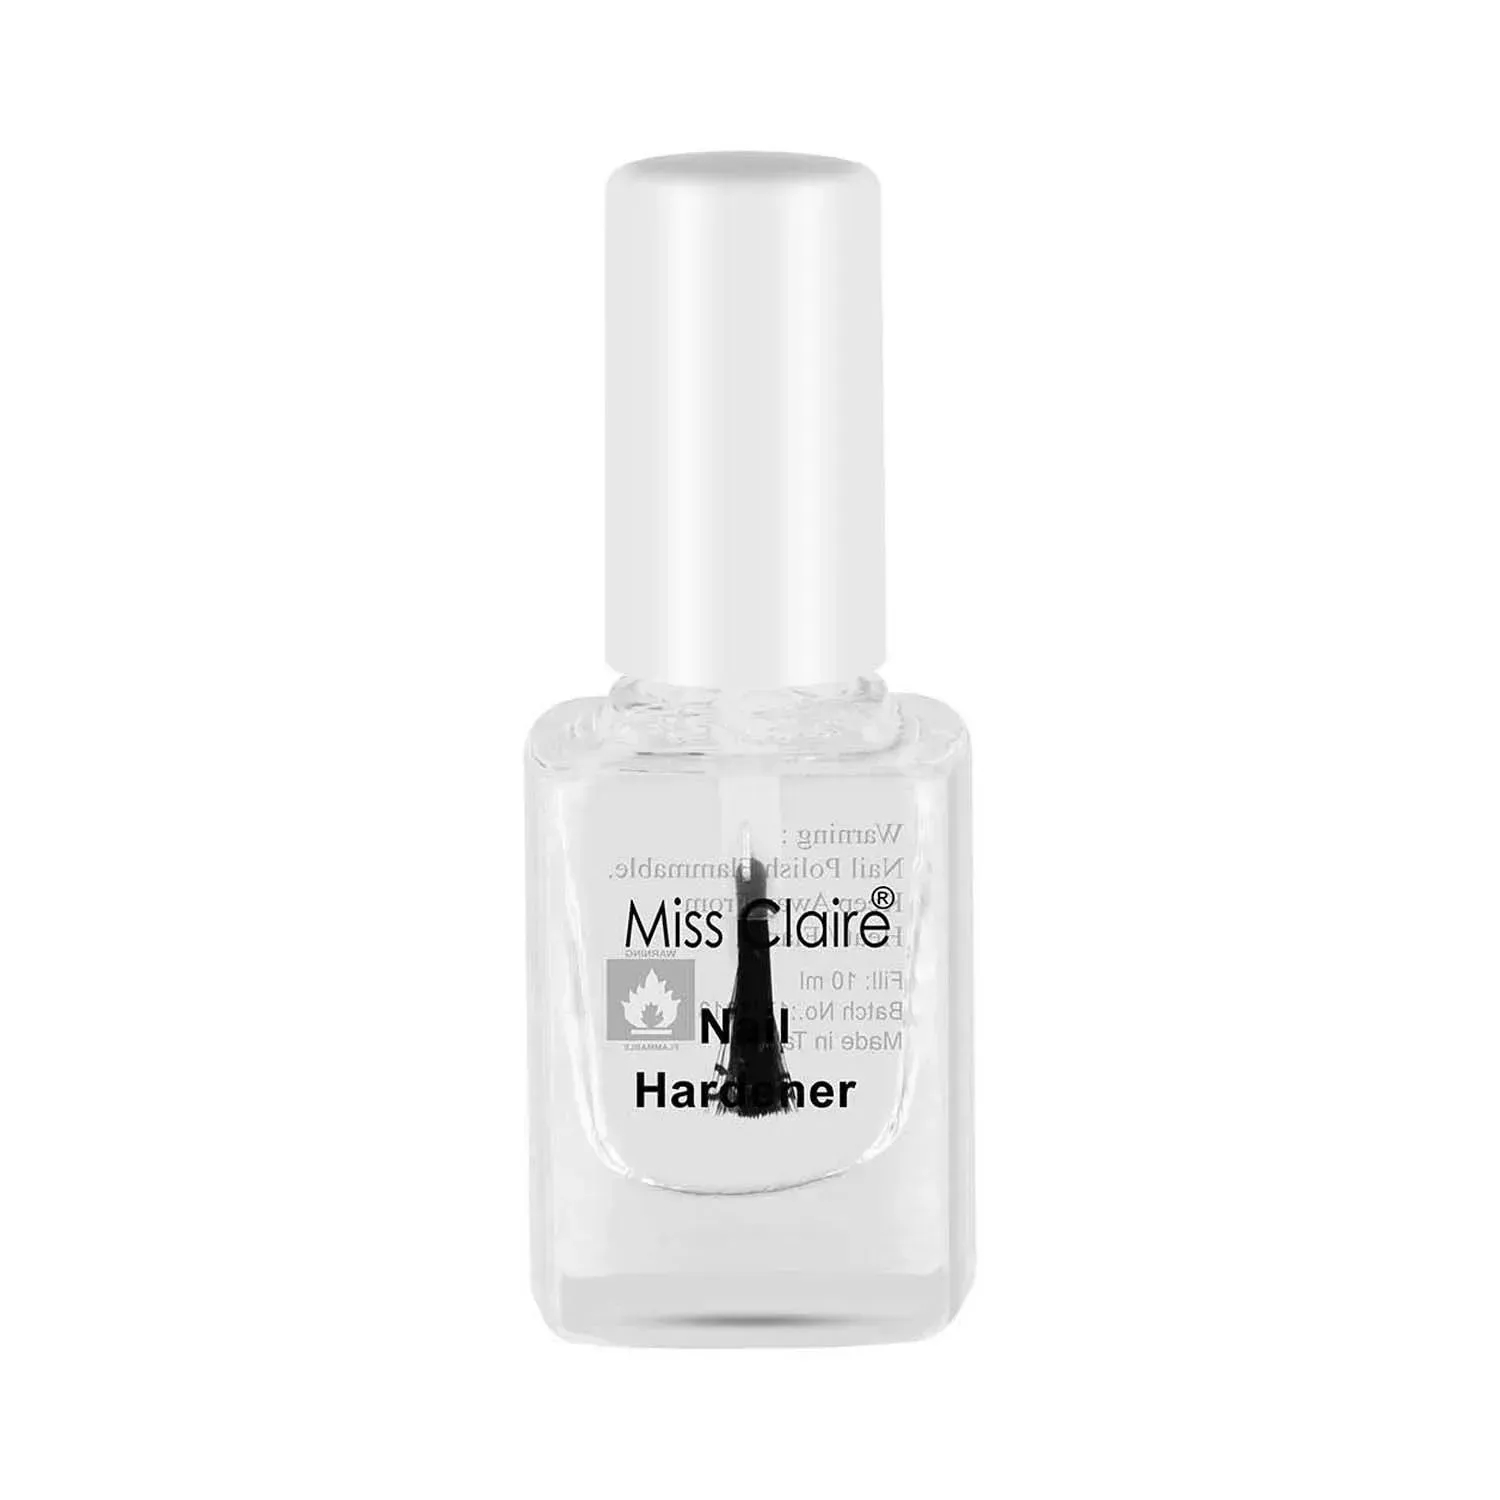 10 Best Nail Strengtheners: Reader's Choice